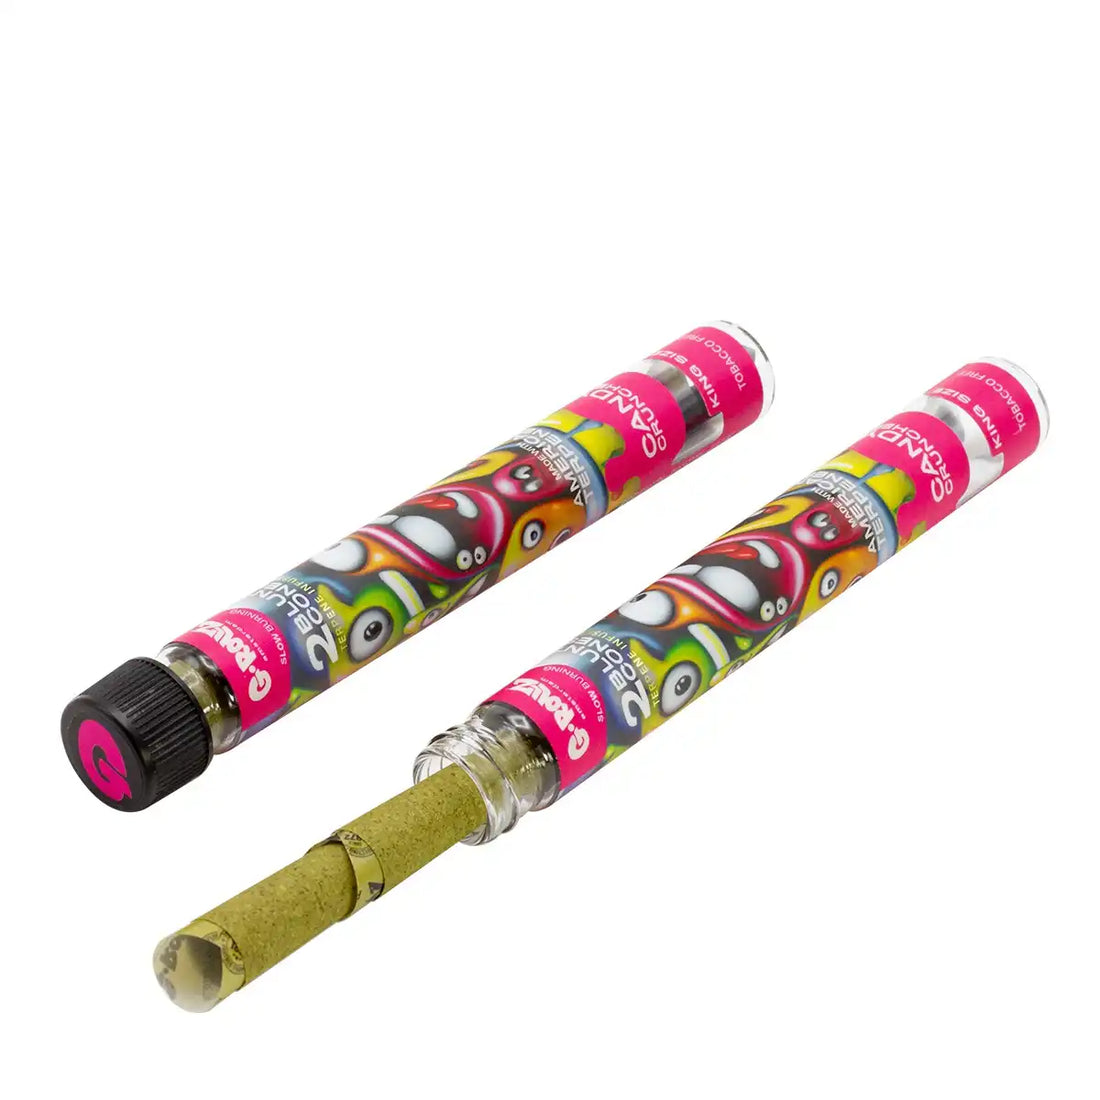 G-Rollz 2 Terpene Infused Blunt Cones - Candy Crunched